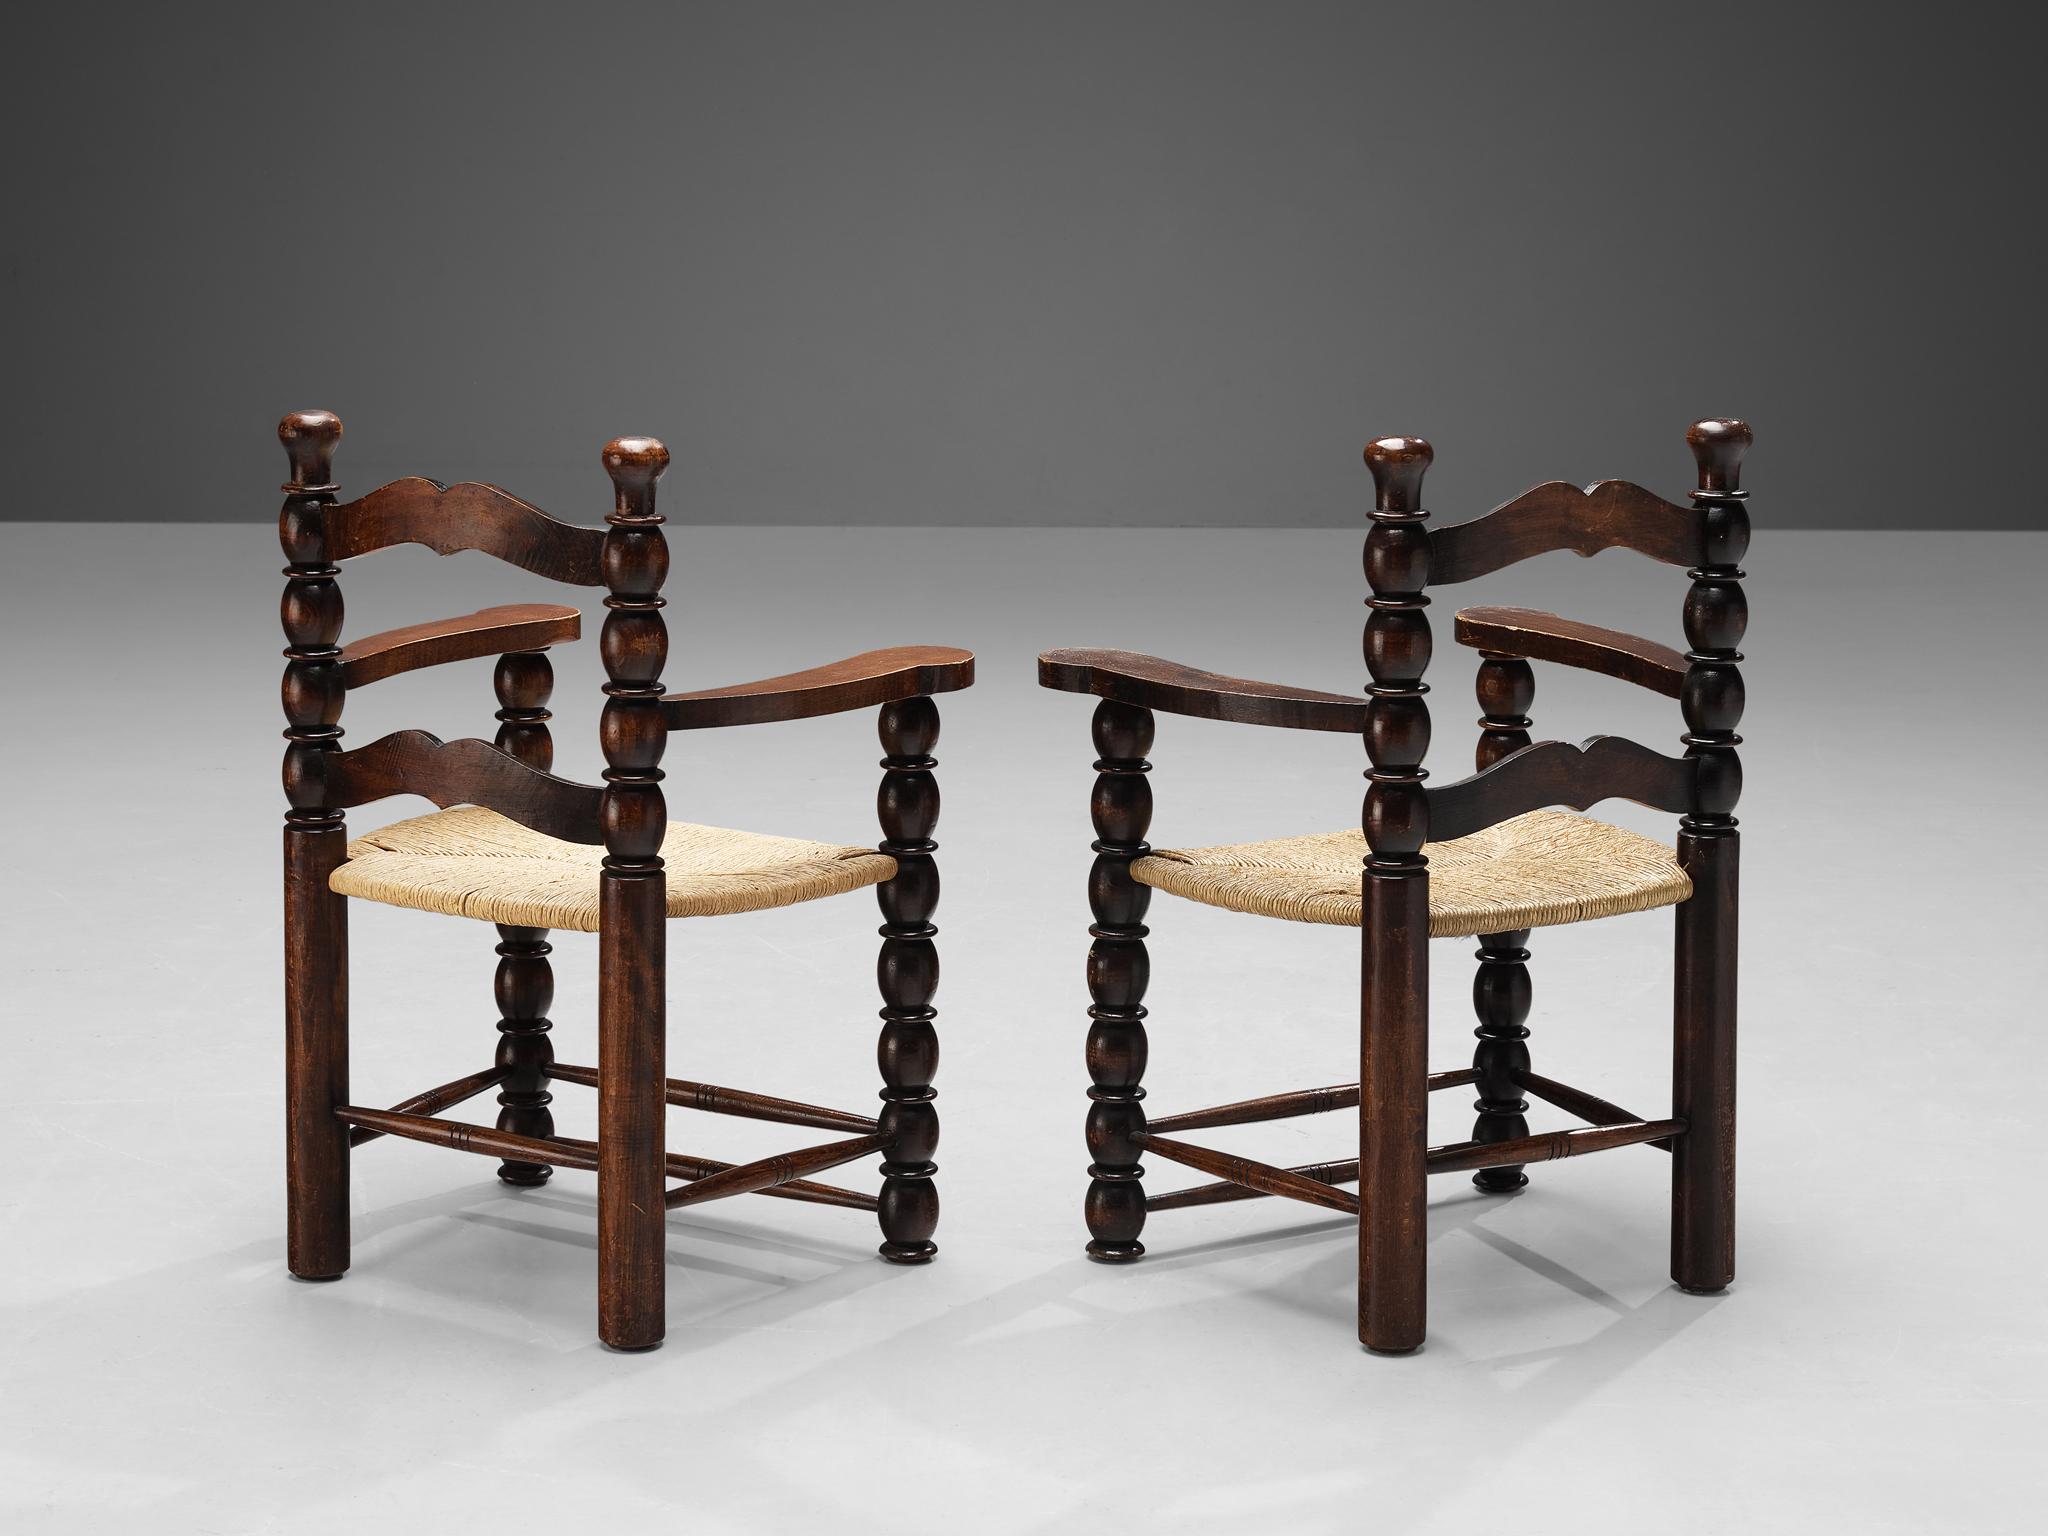 Armchairs, stained wood, straw, France, 1940s.

Decorative French armchairs. The stained wooden frame has multiple carved details that add up to a complex whole. Carved lines and circular ends, straight and round parts come together to form a rather